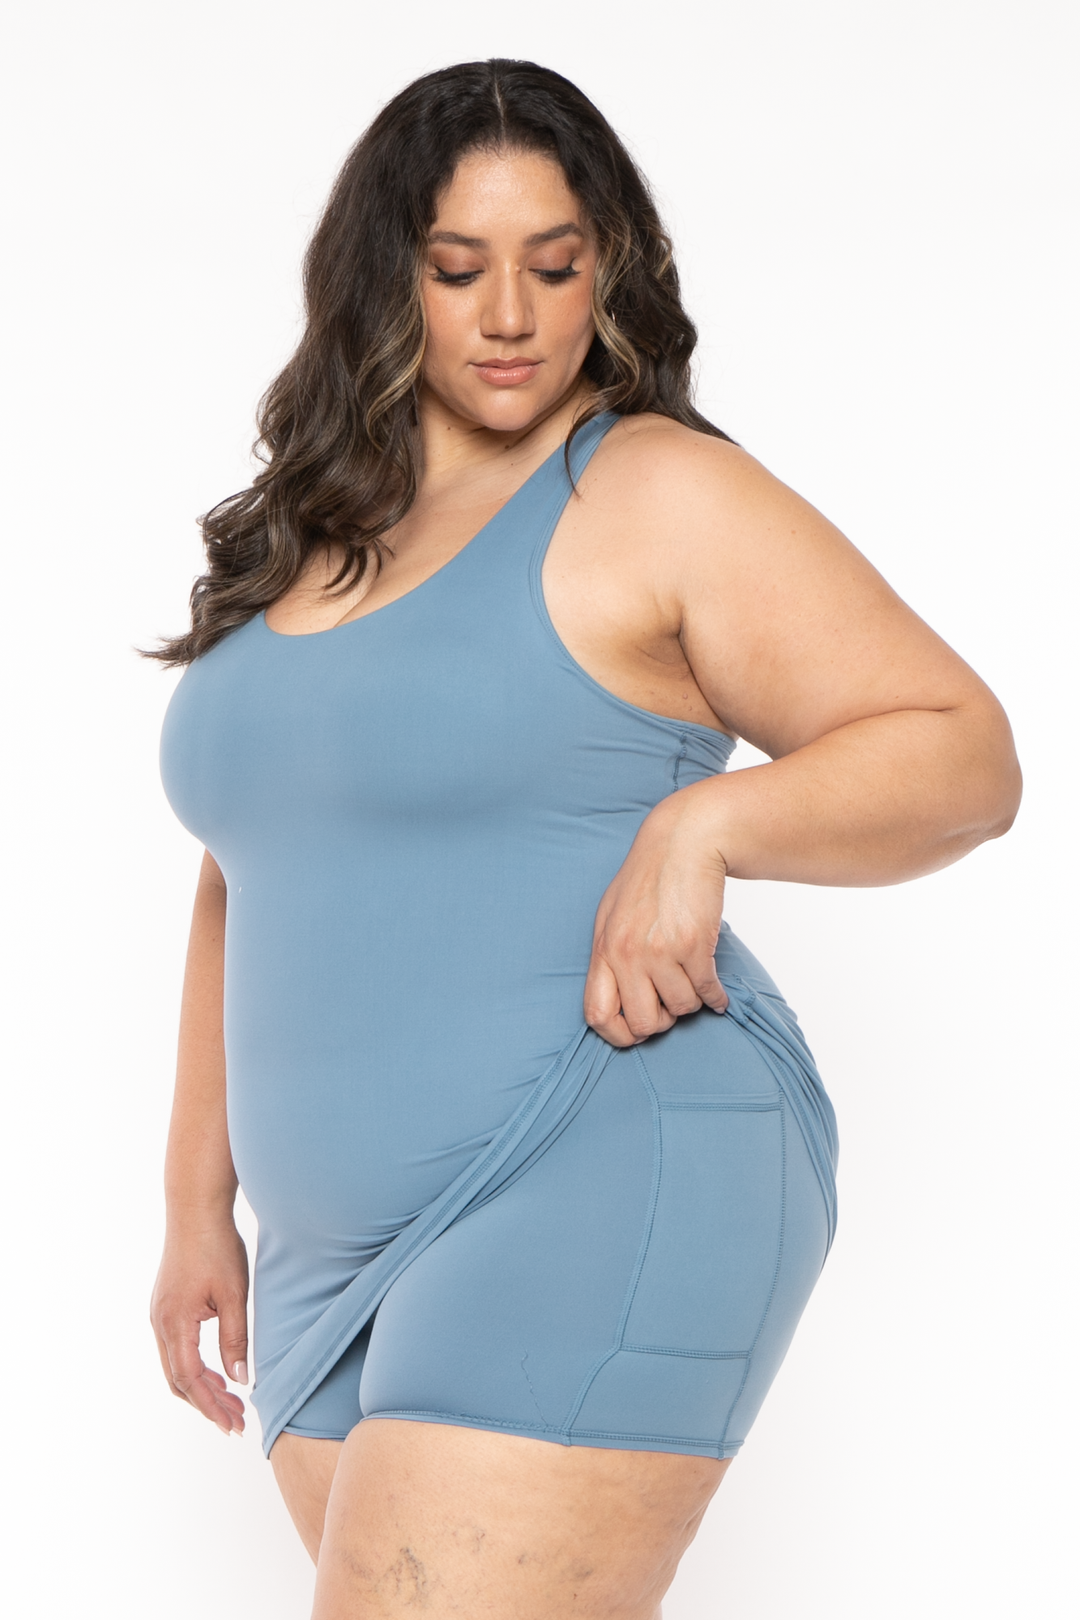 RAE MODE ACTIVEWEAR Plus Size Lizzy  Active Romper Dress  - Periwinkle